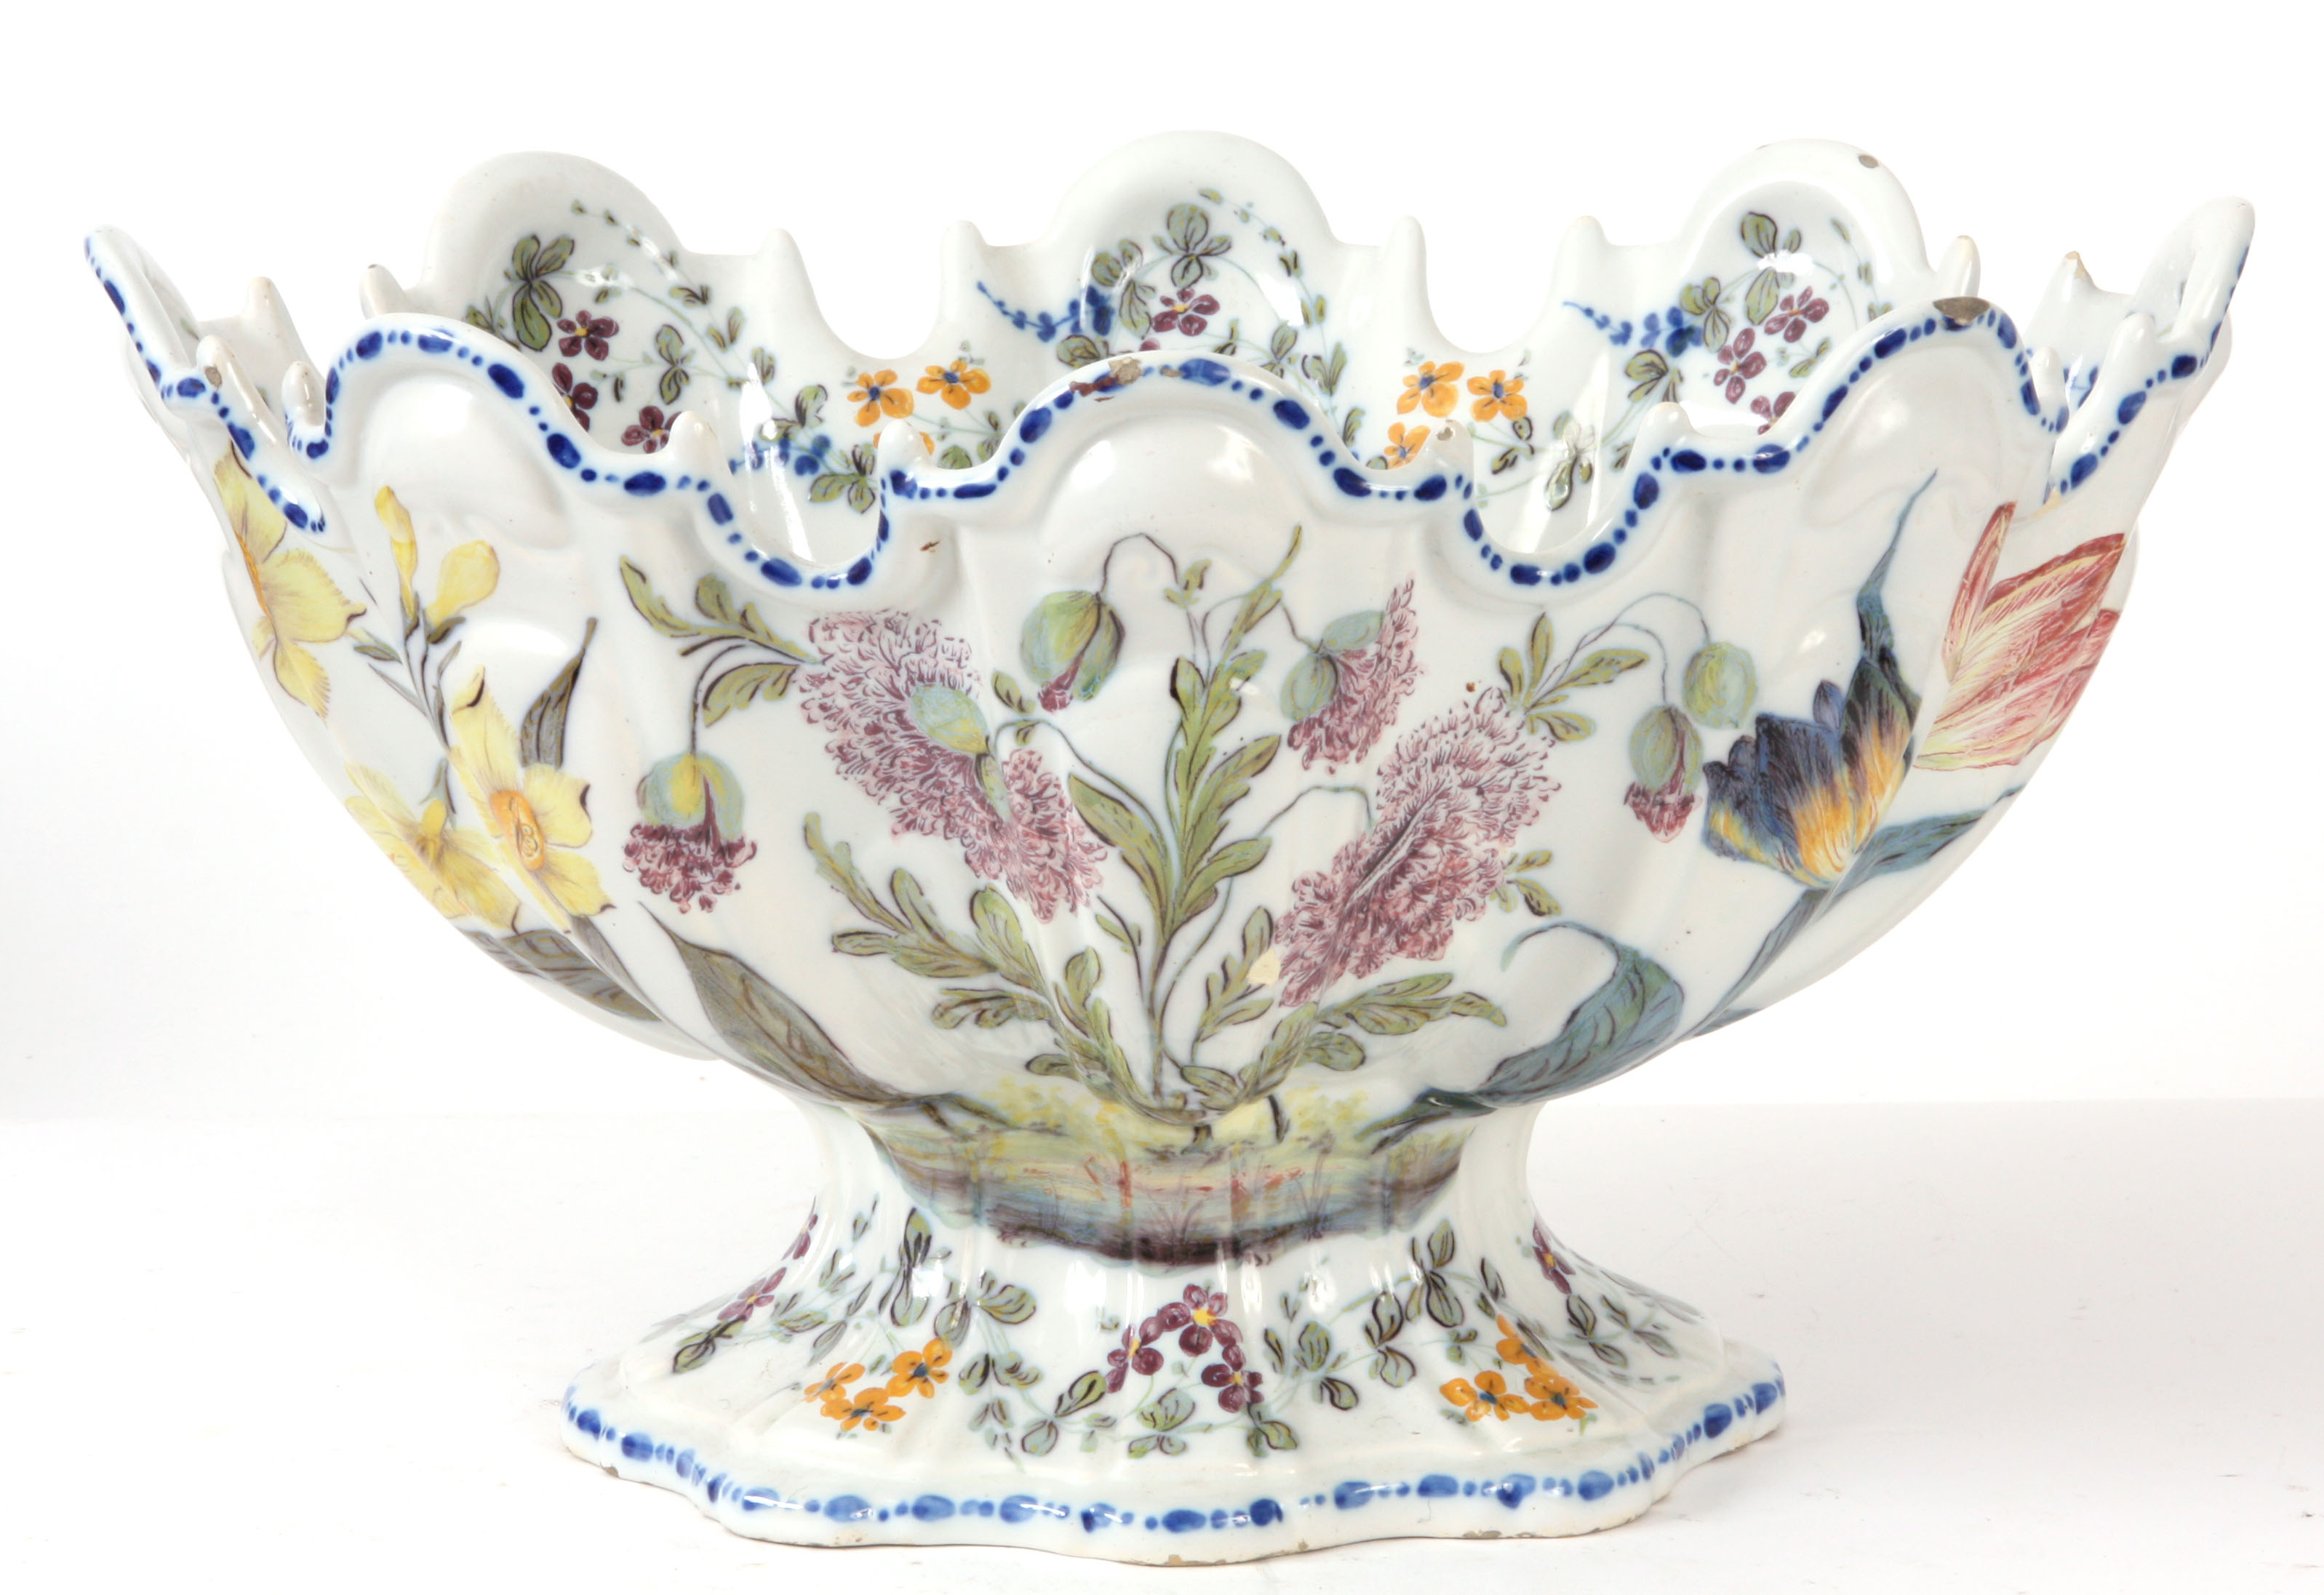 A LARGE  EARLY 19TH CENTURY ITALIAN FAIENCE POTTERY JARDINIERE PROBABLY BY NOVE with scalloped